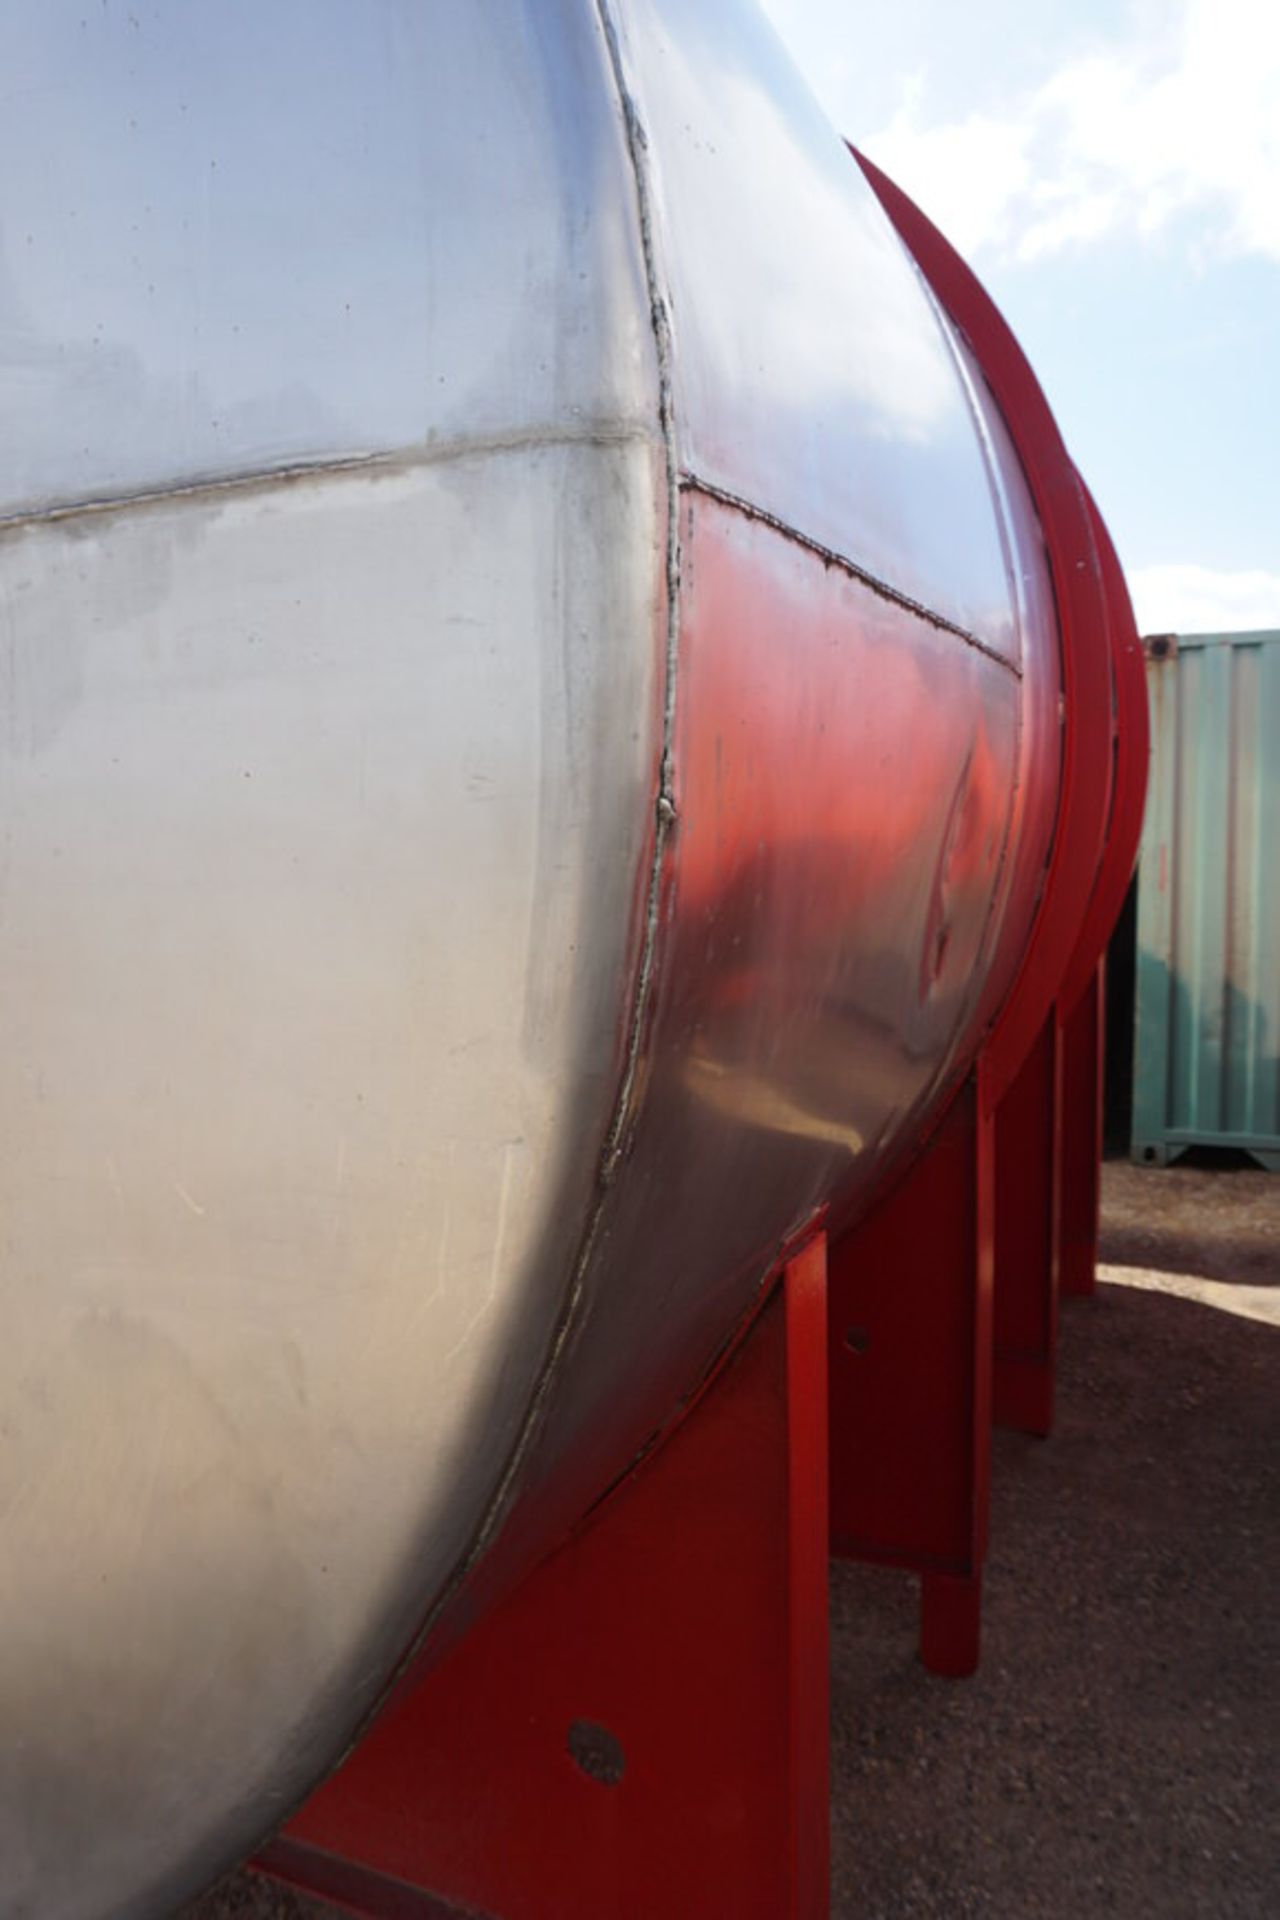 Stainless Steel Storage Tank w/ Stand, Approx 8' Dia x 15' lg x 10' Tall (LOCATION: ROME, TX) - Image 3 of 5